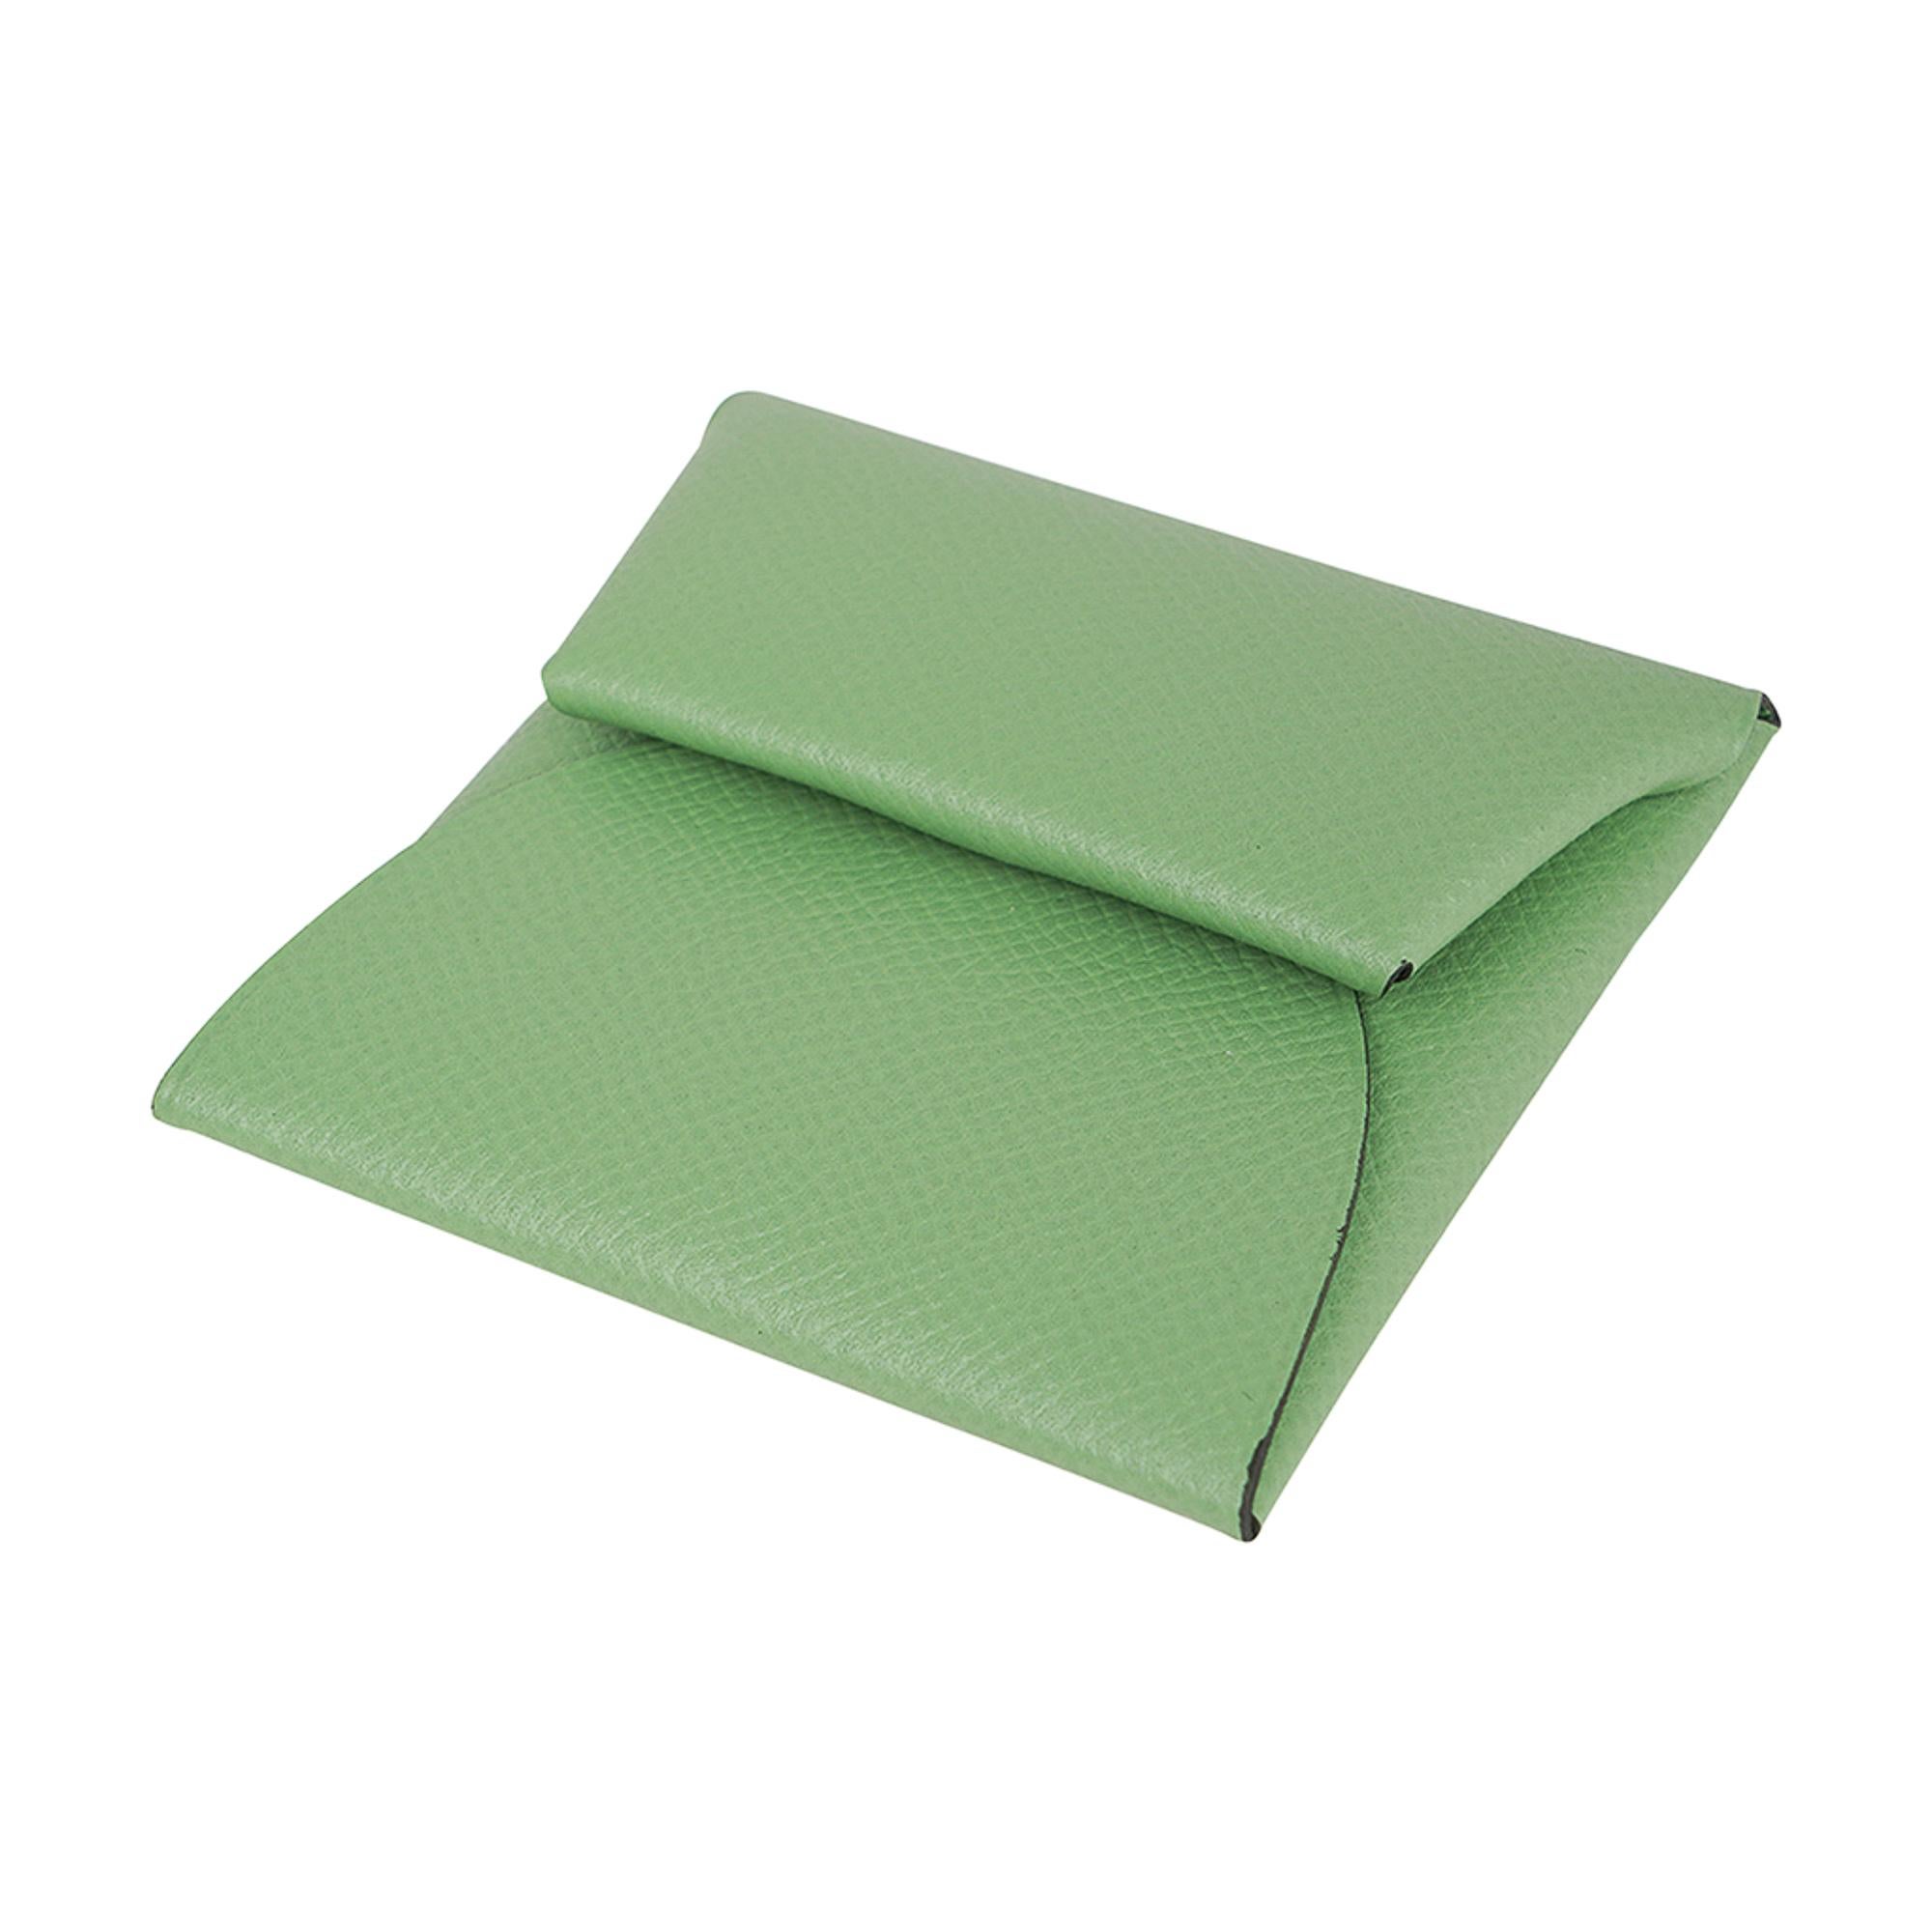 Mightychic offers an Hermes Bastia change purse featured in fresh  Vert Criquet.
Beautiful colour enhanced in Epsom leather.
The most charming addition to any bag!
Palladium snap closure.
New or Store Fresh Condition.
Comes with signature Hermes